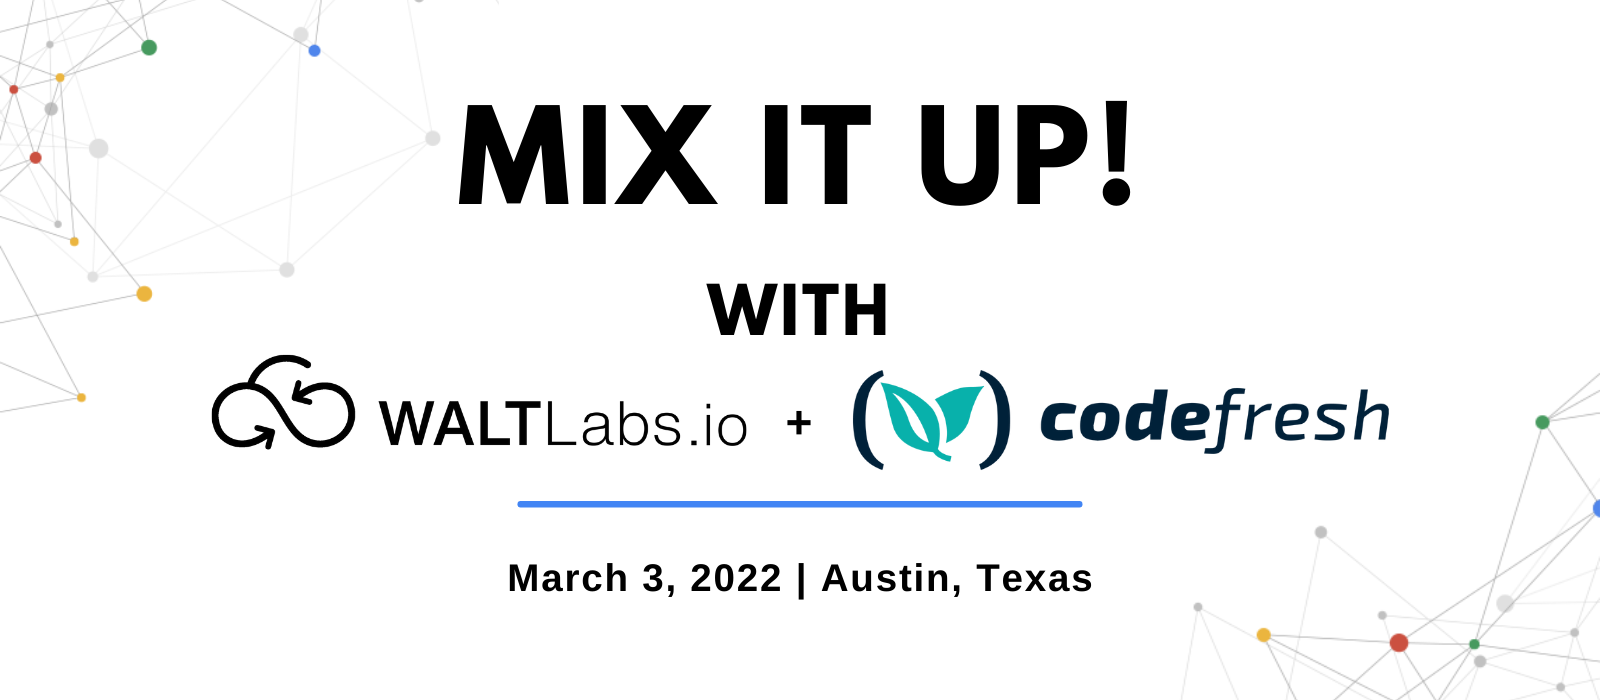 WALTLabs-Mix it Up Blog - Featured Image